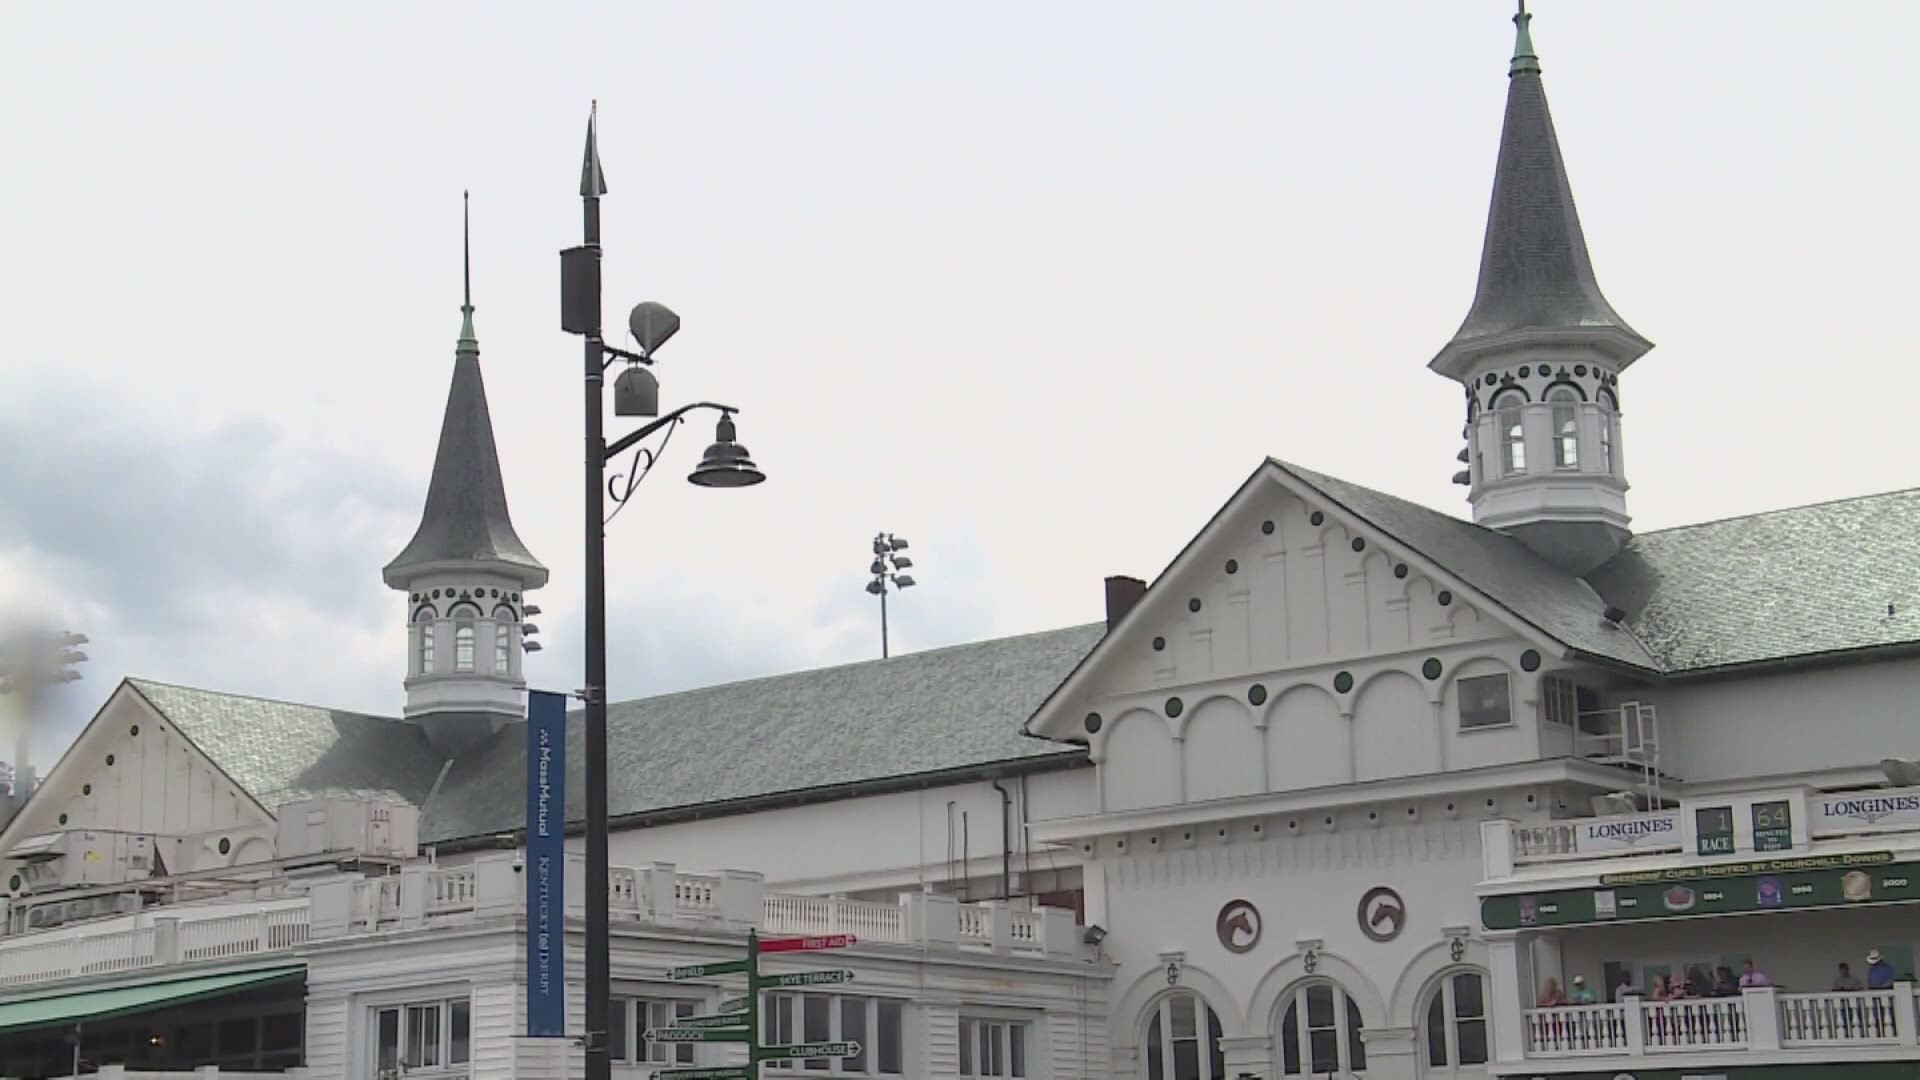 The Kentucky Derby is the largest generator for Louisville Tourism, but with restrictions still lingering and the pandemic ongoing, what does this mean for the city?